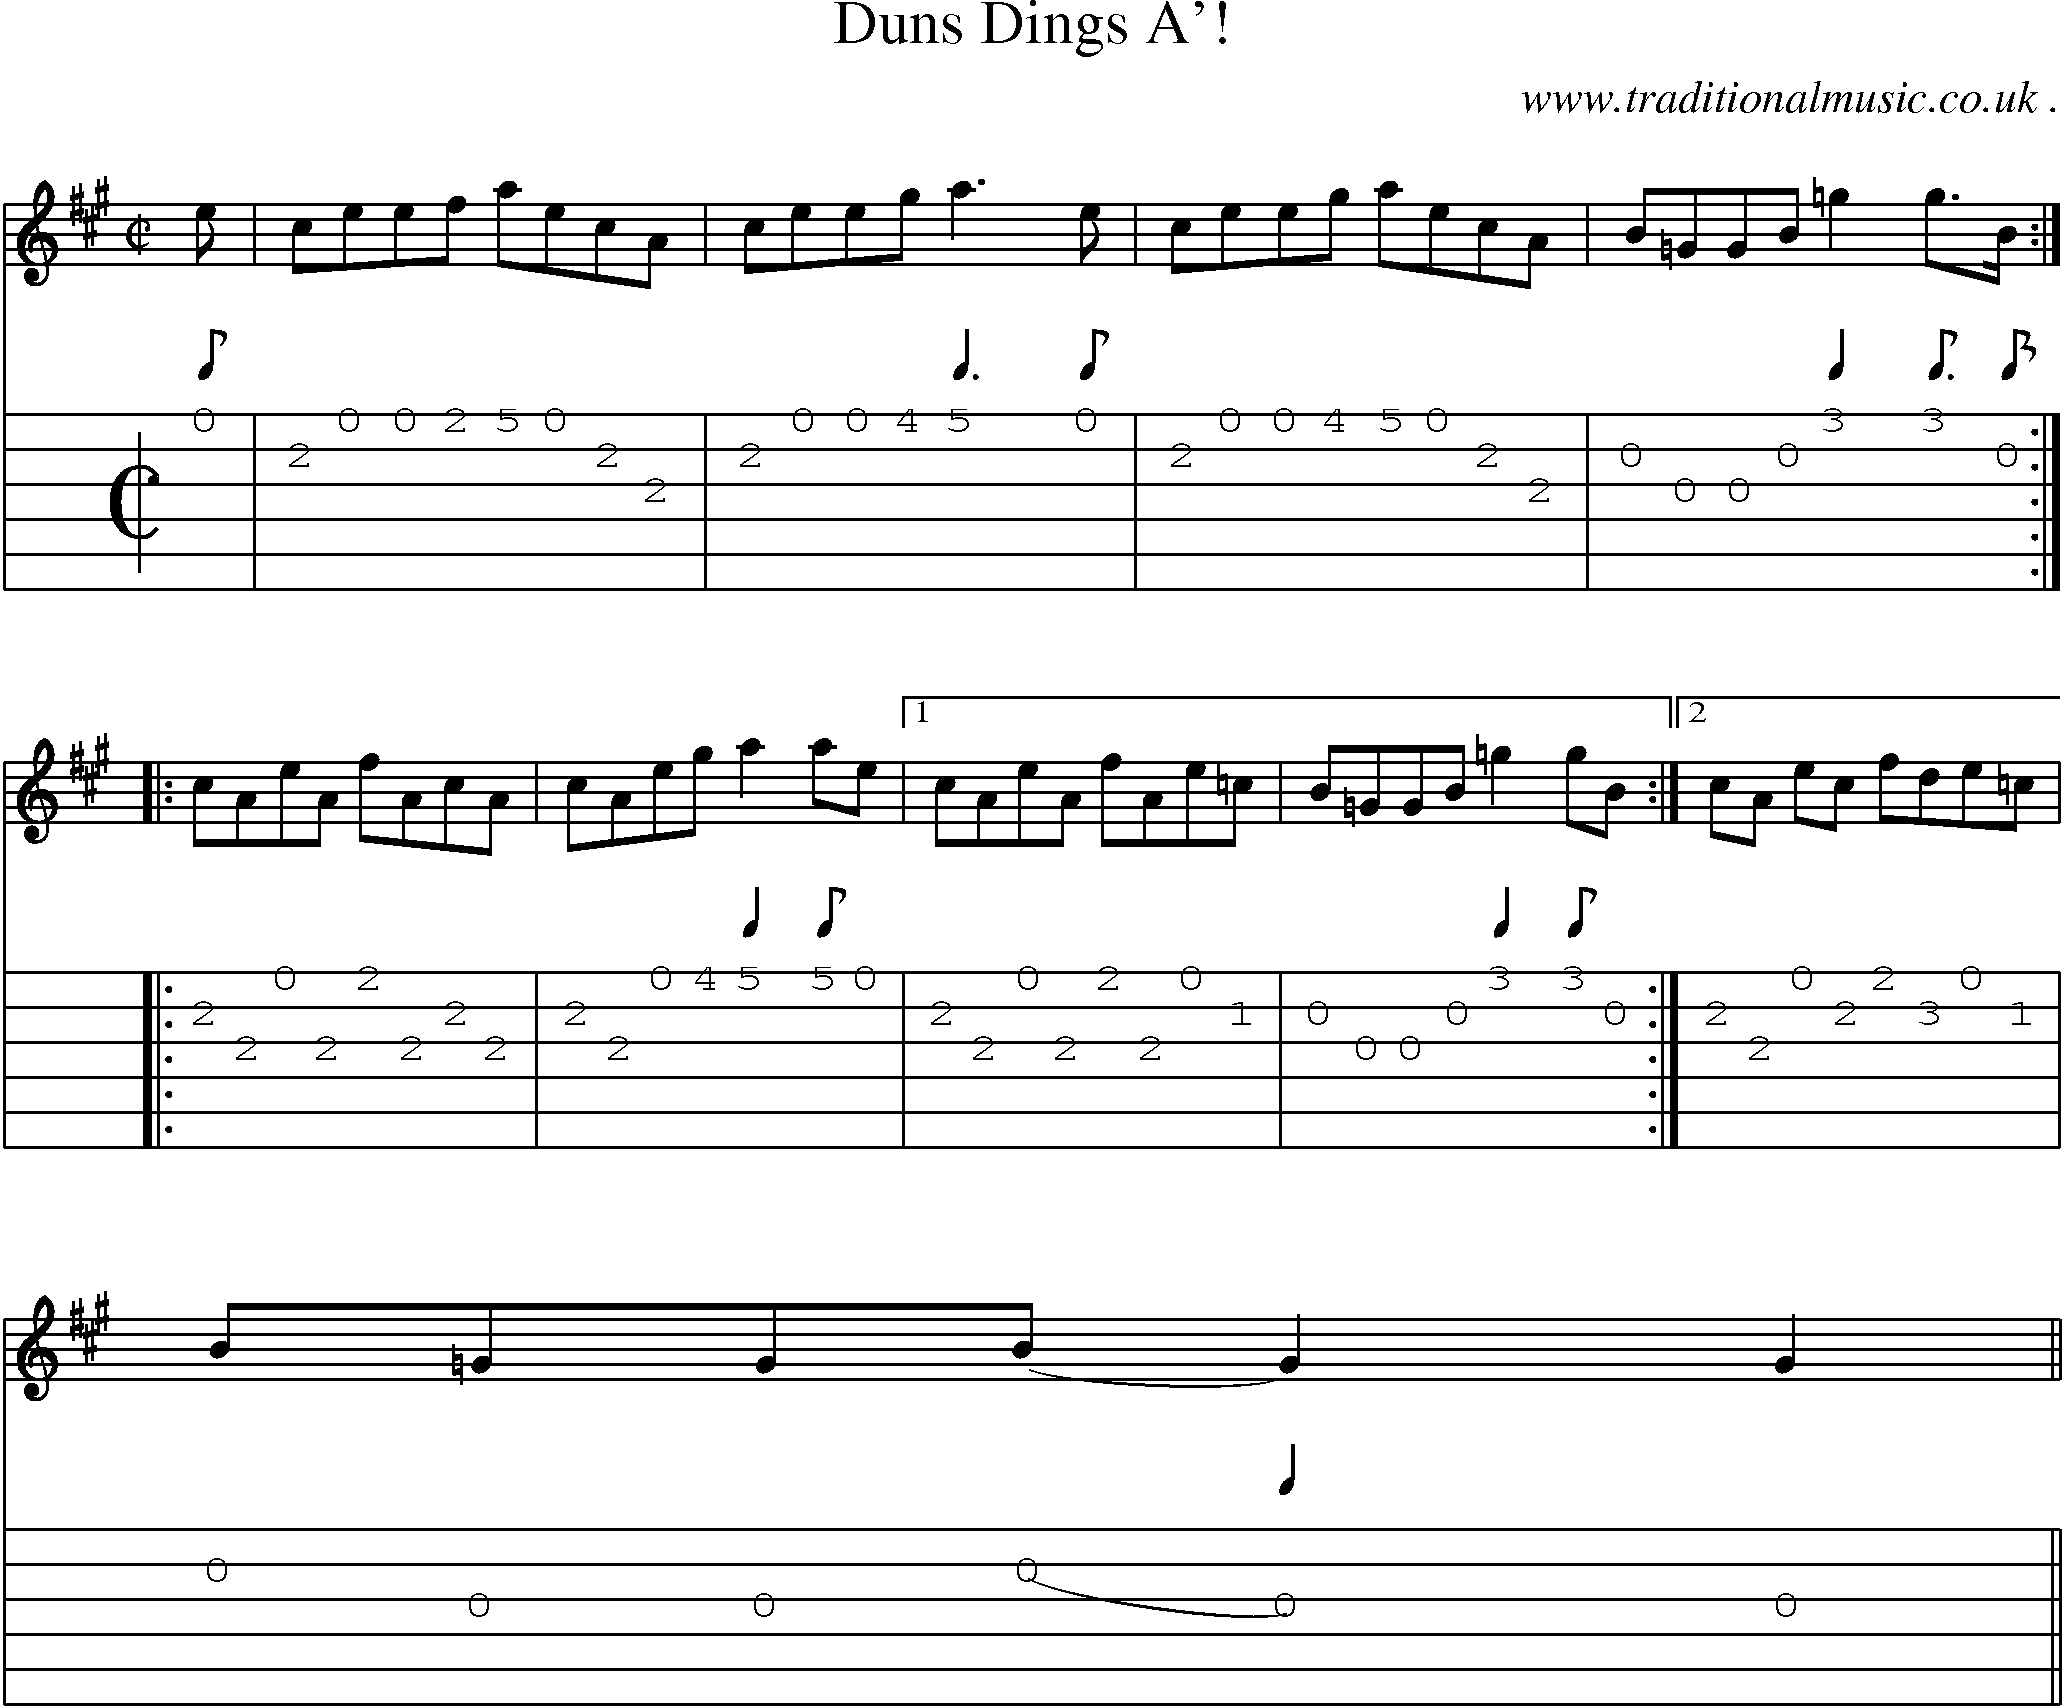 Sheet-music  score, Chords and Guitar Tabs for Duns Dings A!